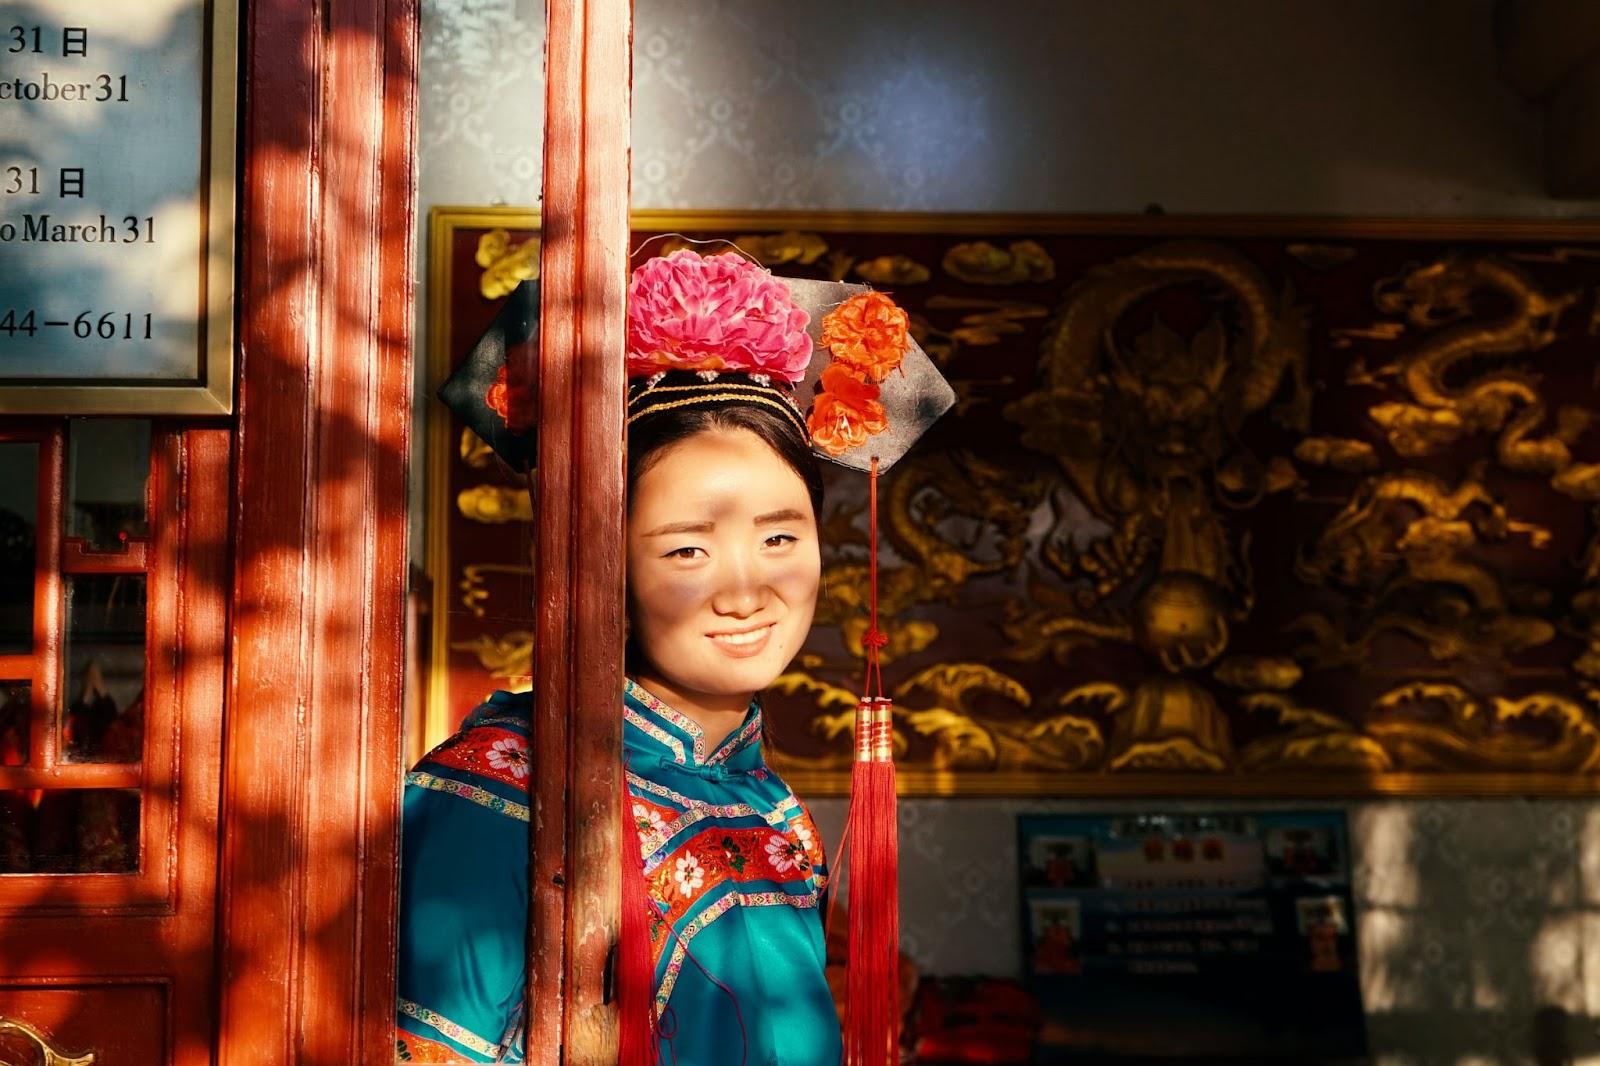 Chinese woman in traditional dress standing in the doorway of a temple